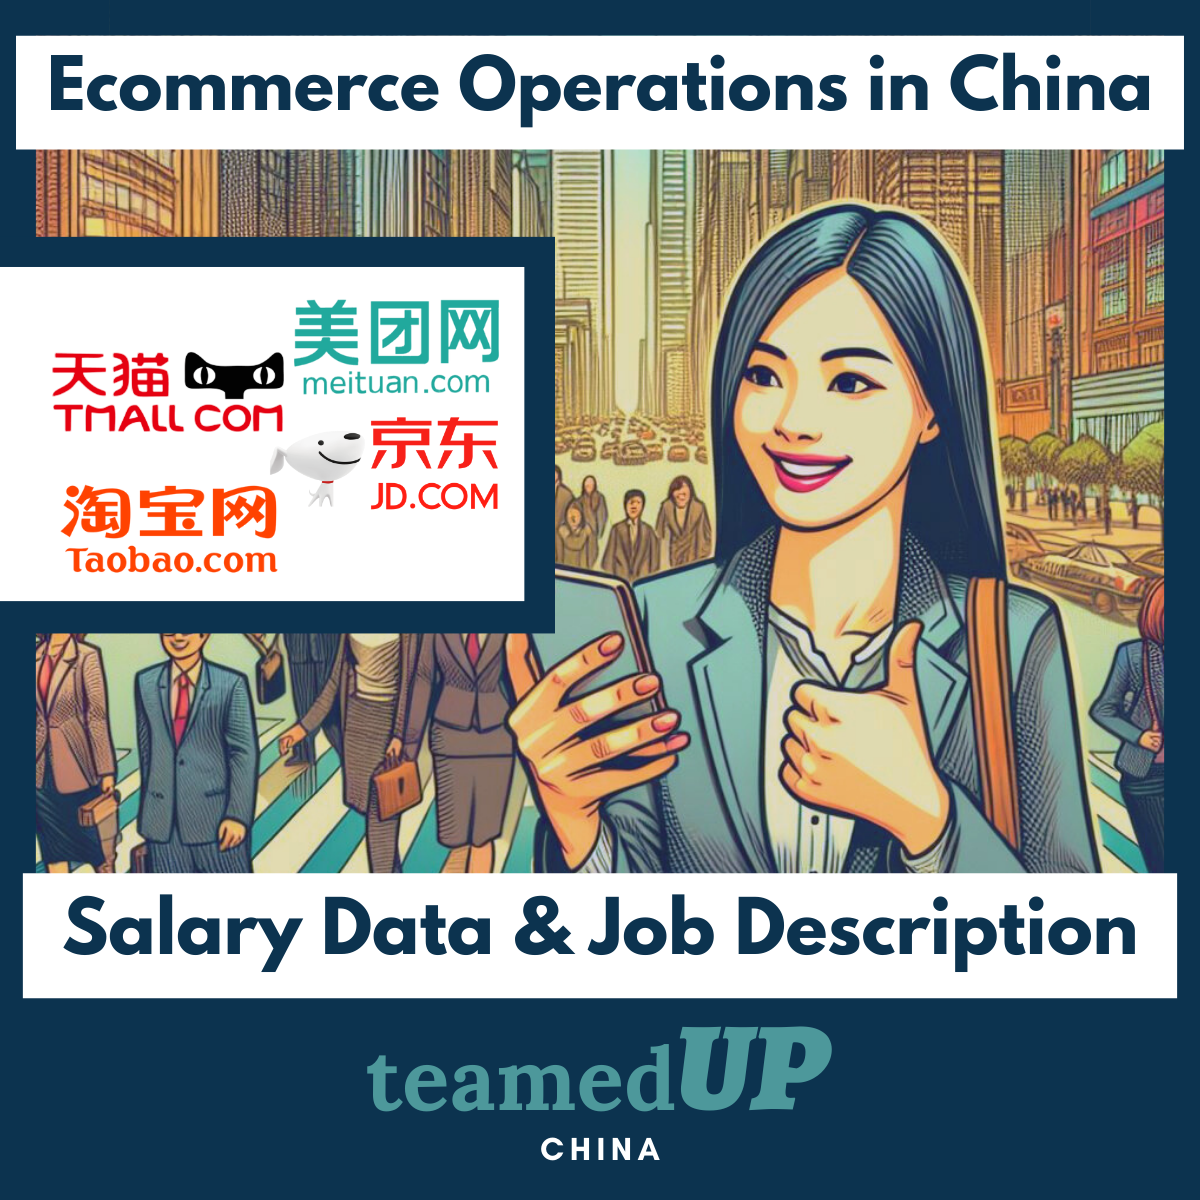 Ecommerce Operations in China - Average Salary and JD - TeamedUp China